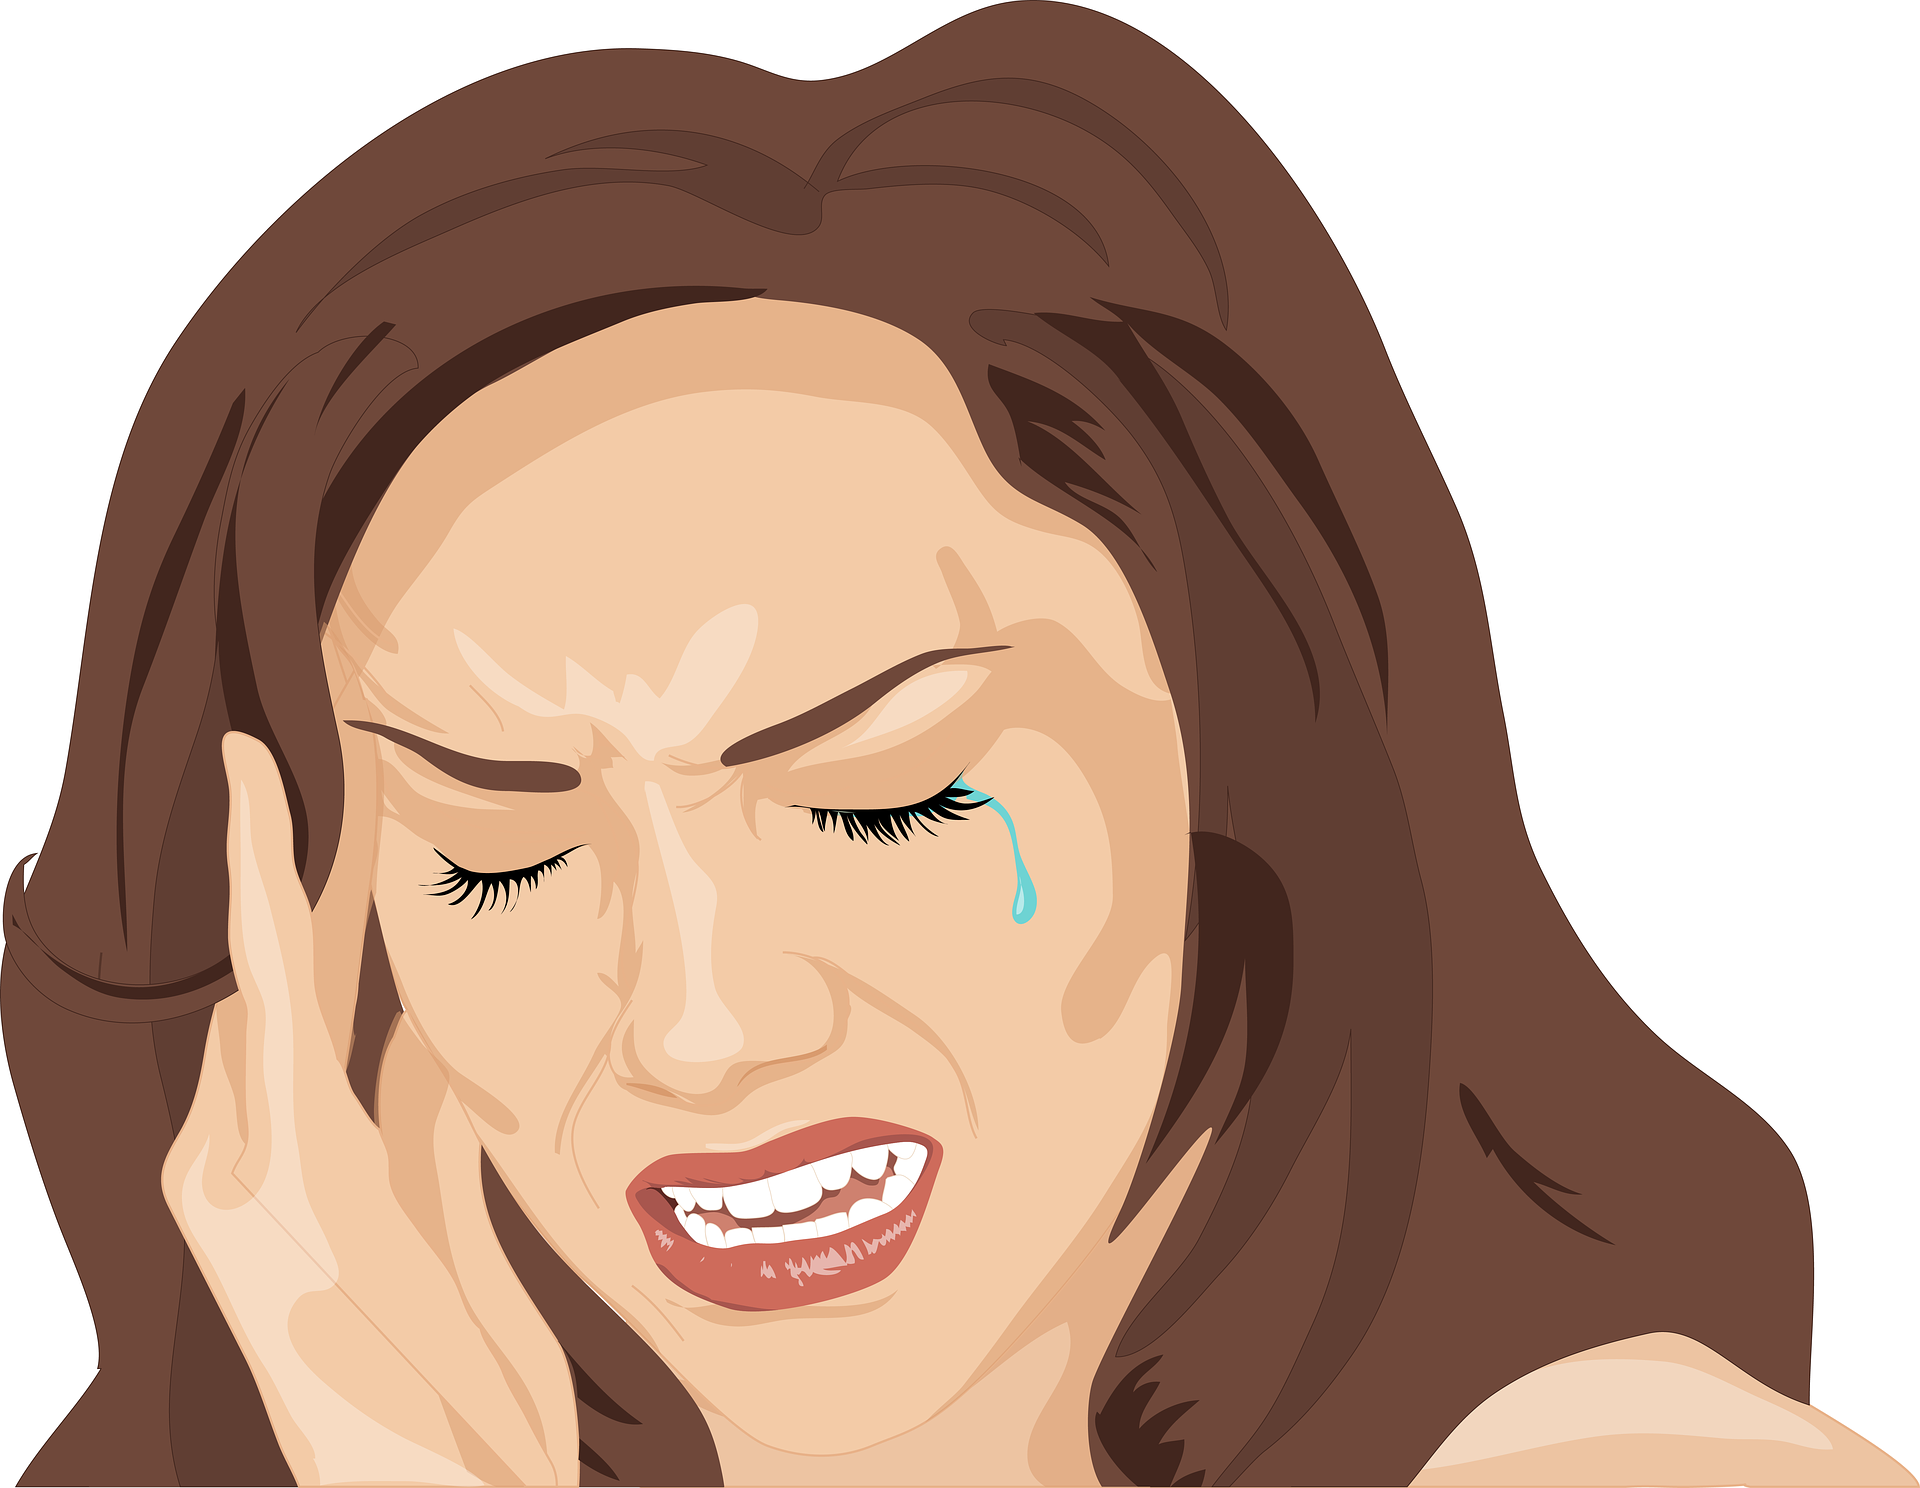 Illustration of Women Holding Head and Crying